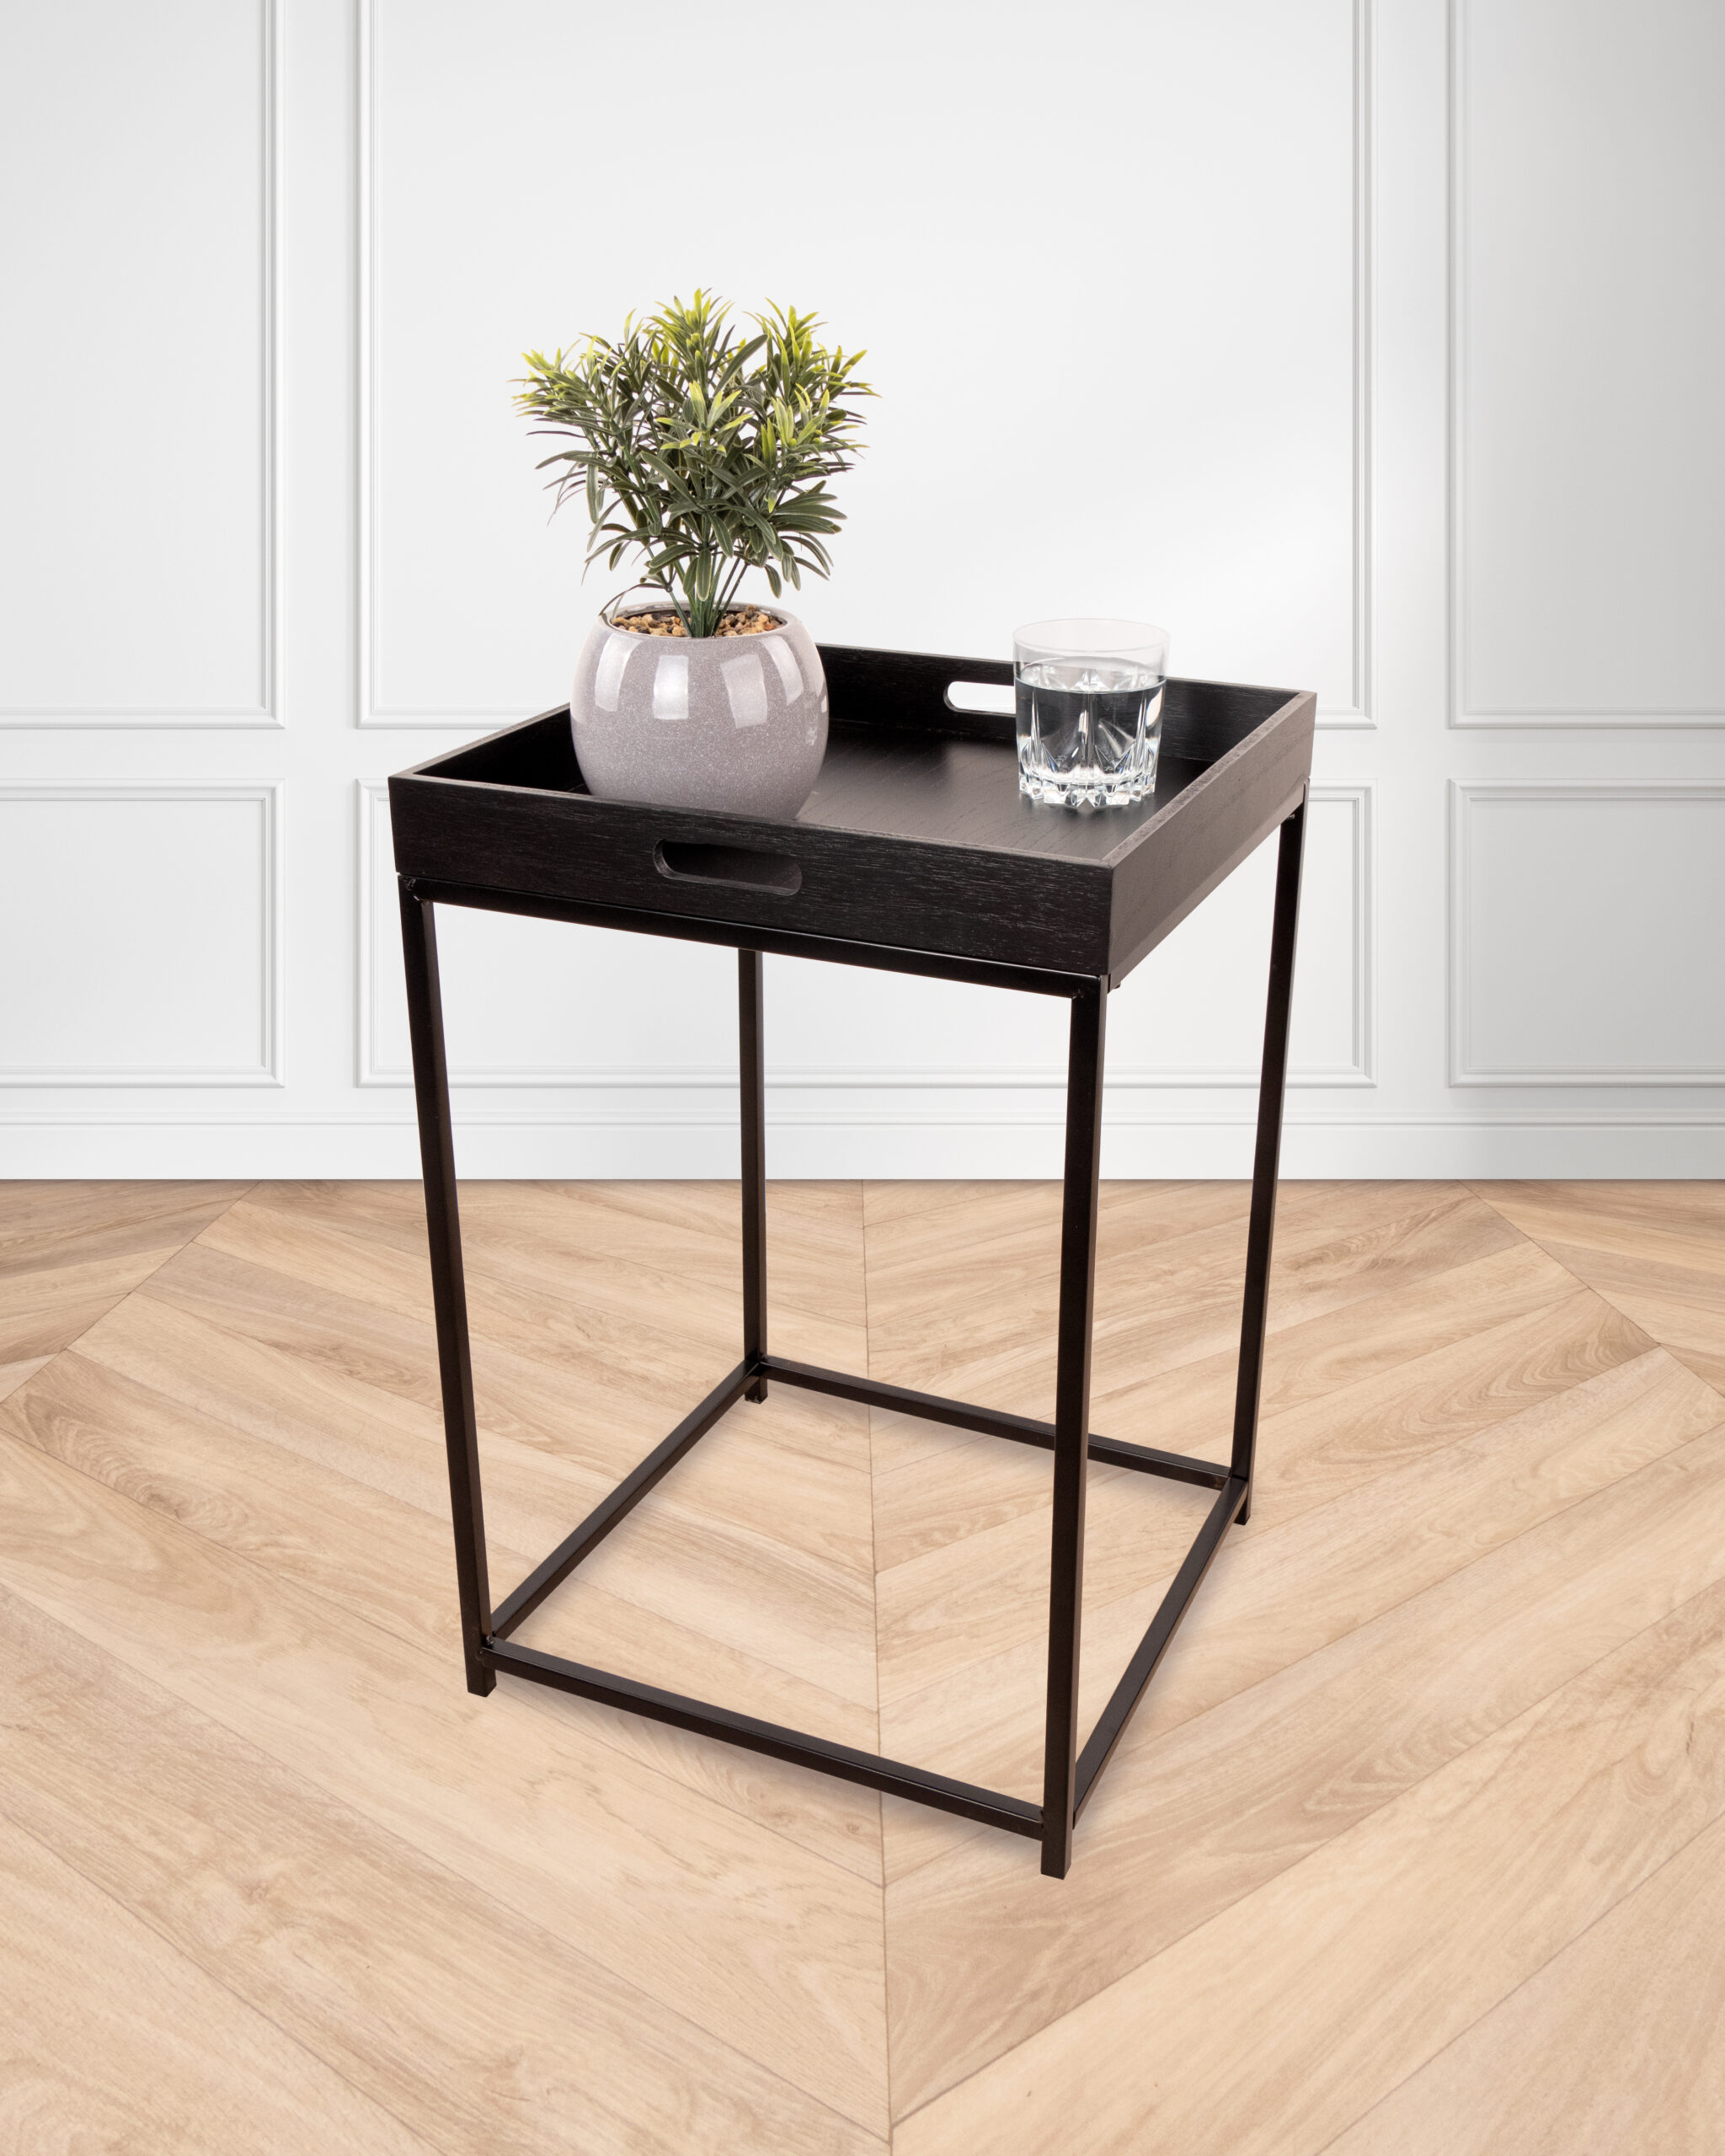 Side table removable tray - Home Accents Decorations